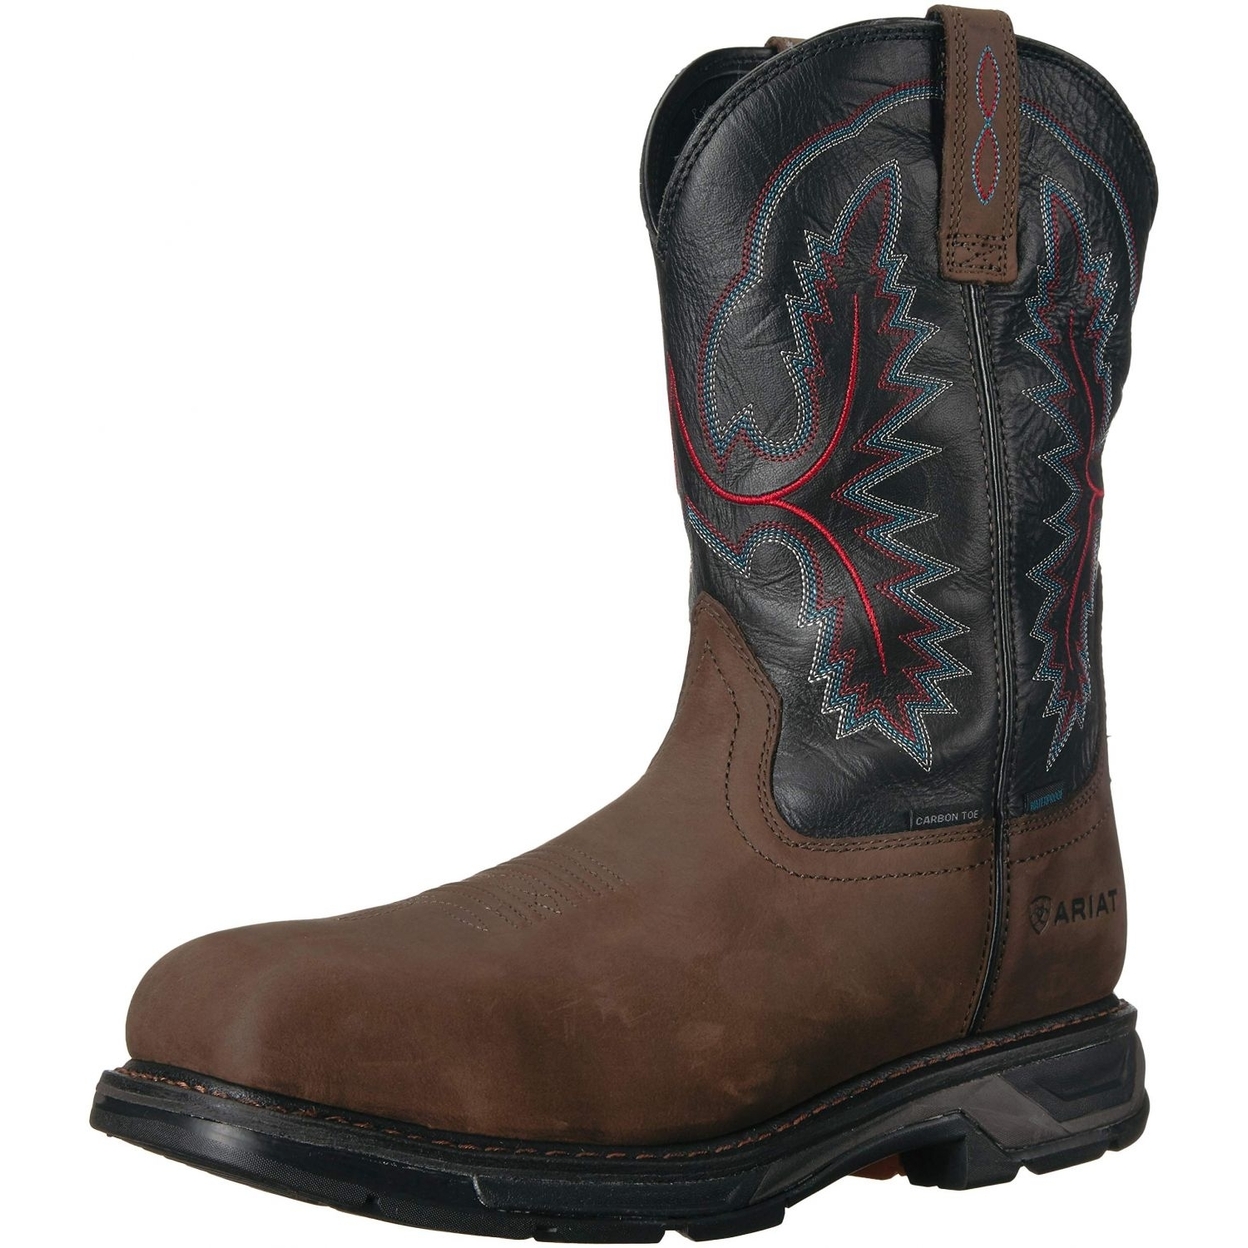 Ariat Work Men's Workhog XT H2O Carbon Toe Western Boot ONE SIZE BRK/ FOREST - BRK/ FOREST, 12-2E